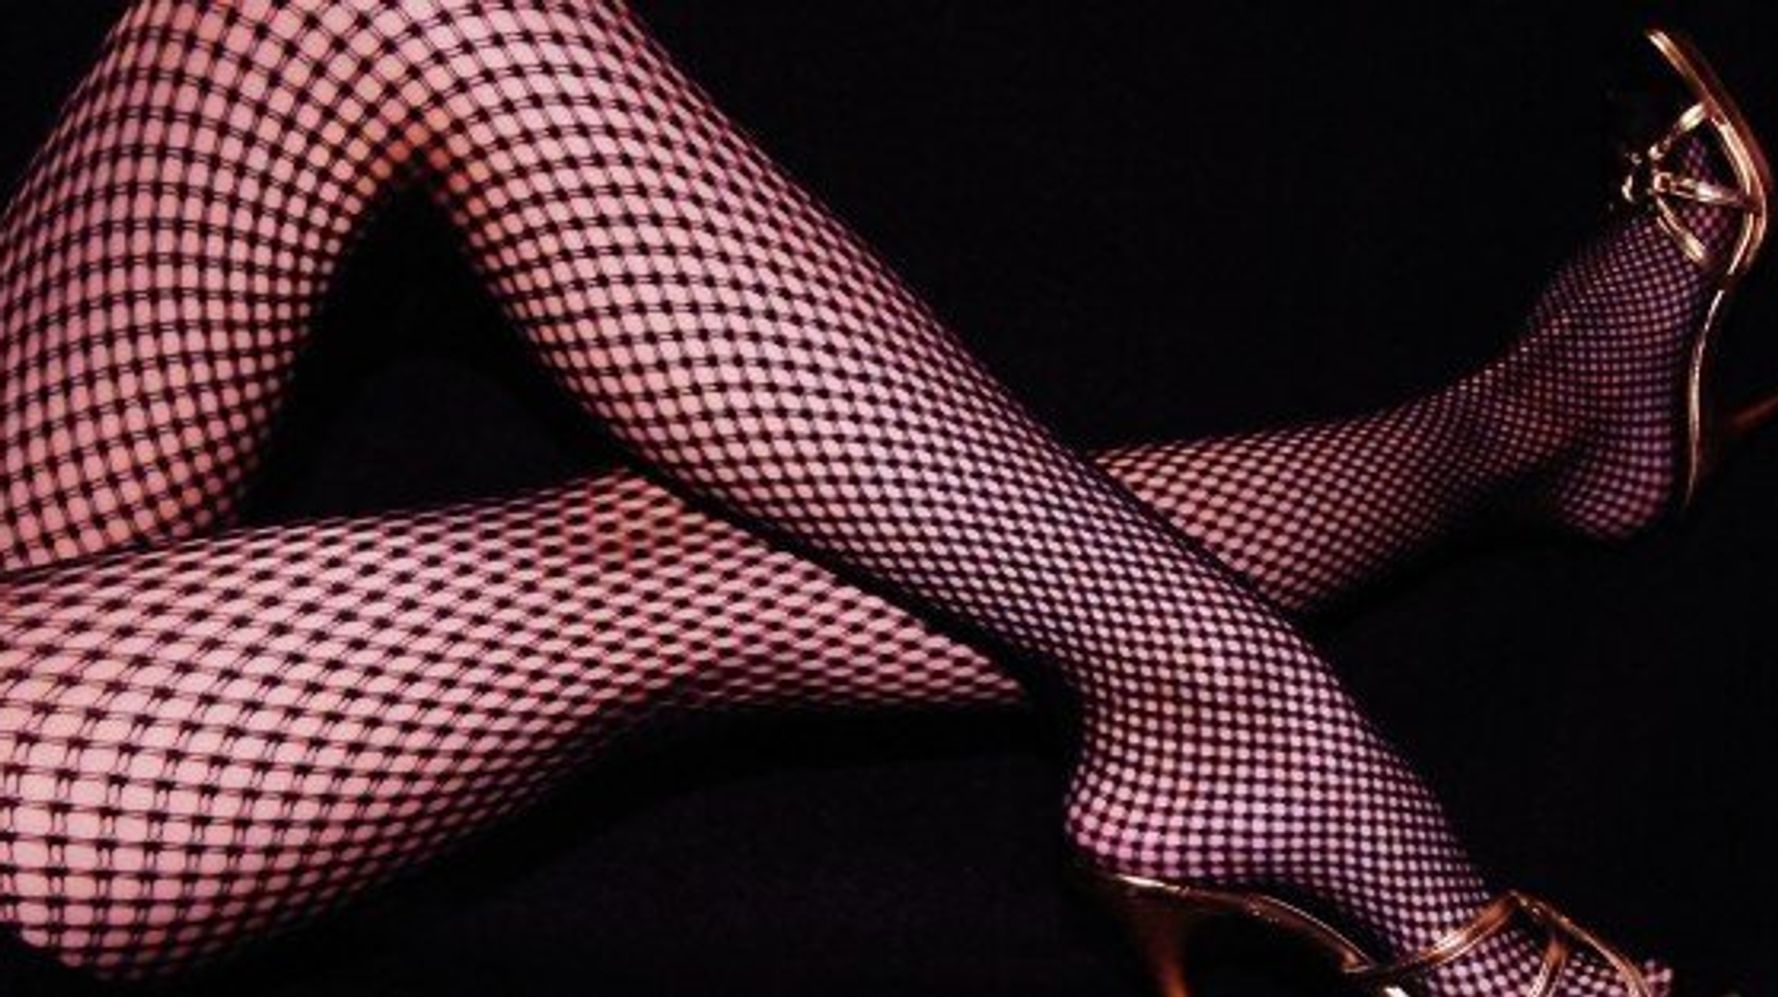 Woman Wore Revealing Fishnet Outfit to Her Grandfather’s Funeral Also Claims He Would Approve!